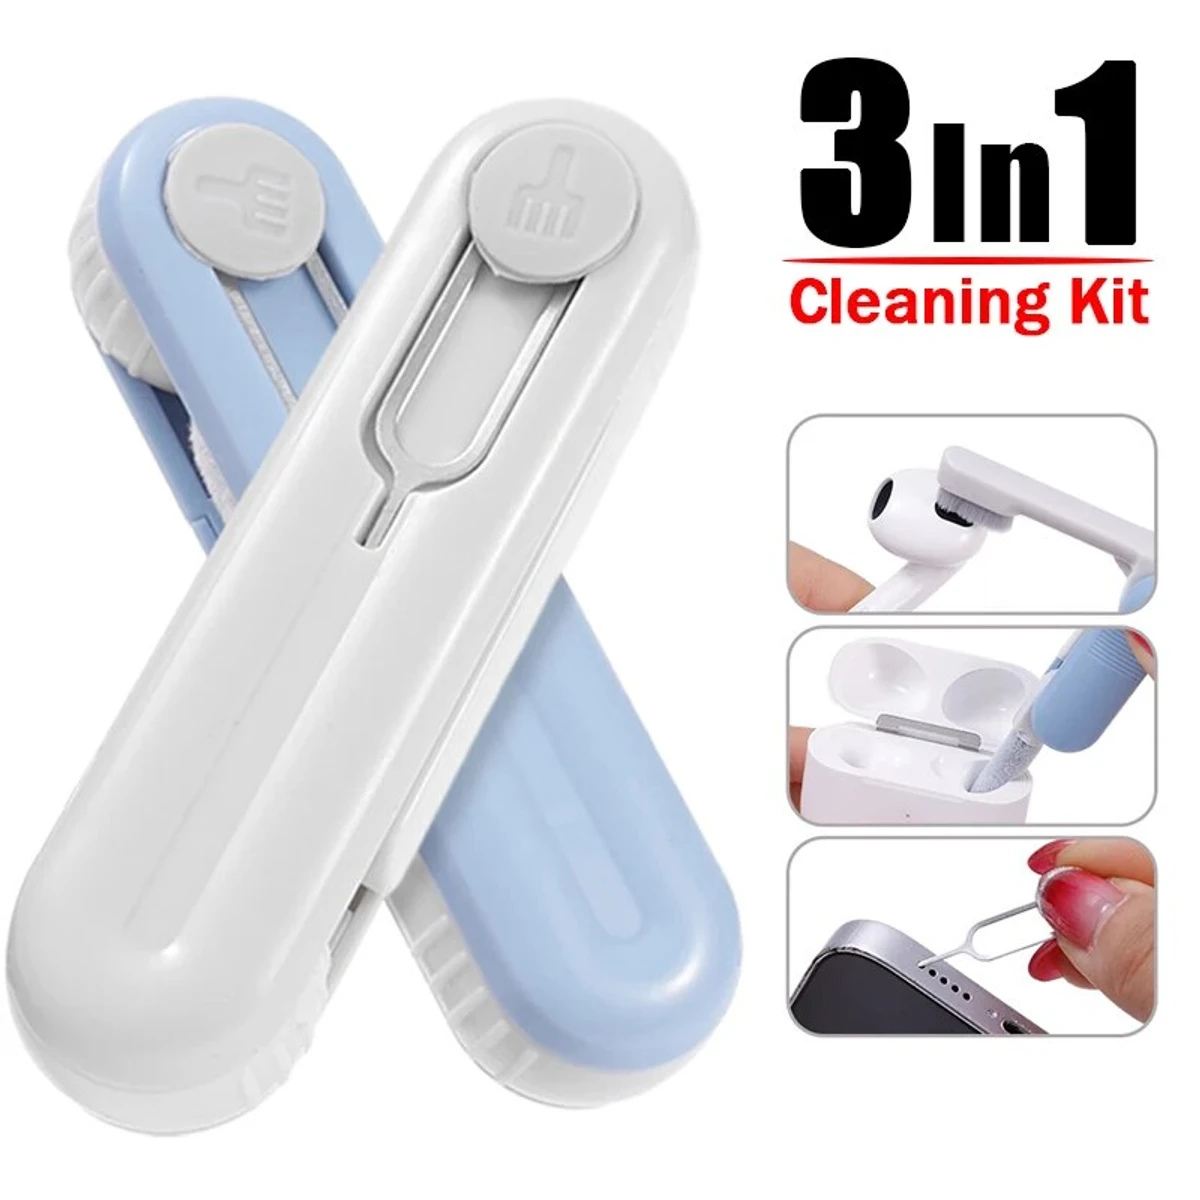 7-in-1 Electronic Cleaner Kit - Portable Cleaning for Airpods Laptop, Keyboard, with Cleaning Pen Brush Spray for Phone iPad  Computer Screen/Keyboard/Headphones/Bluetooth Earphones (Light Blue).